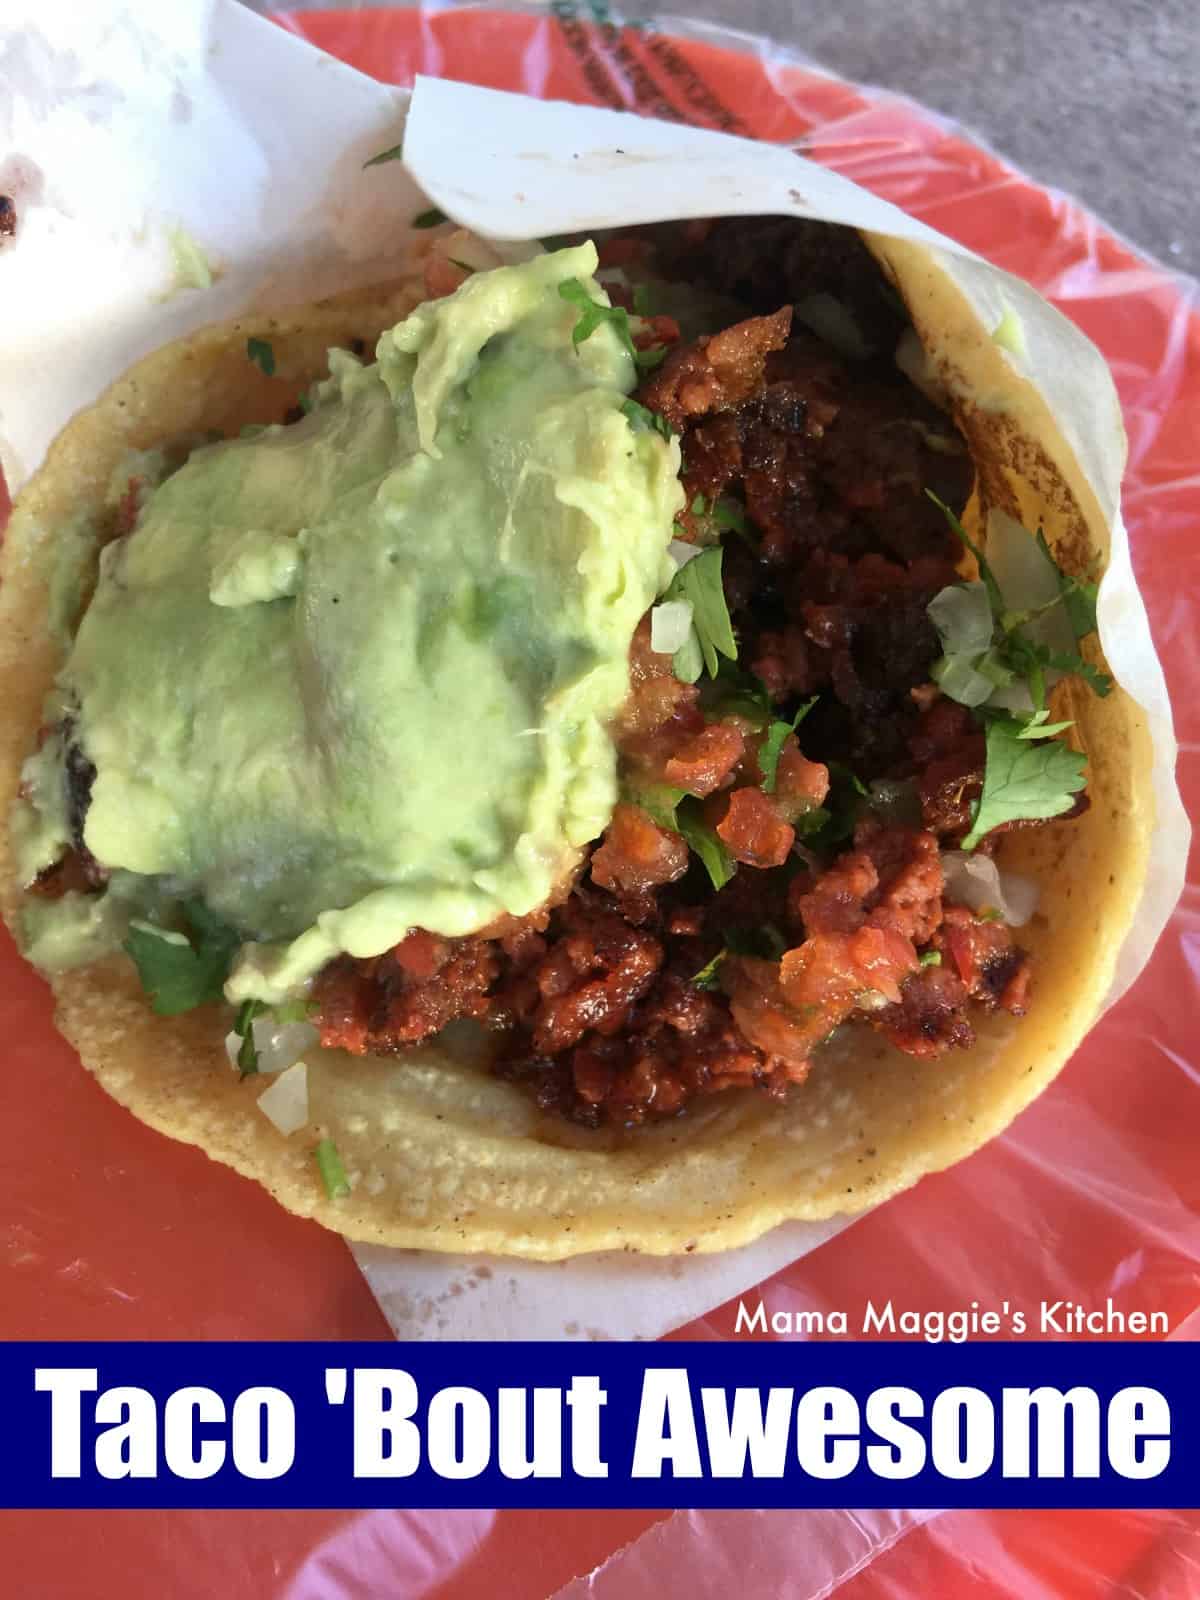 A taco topped with guacamole